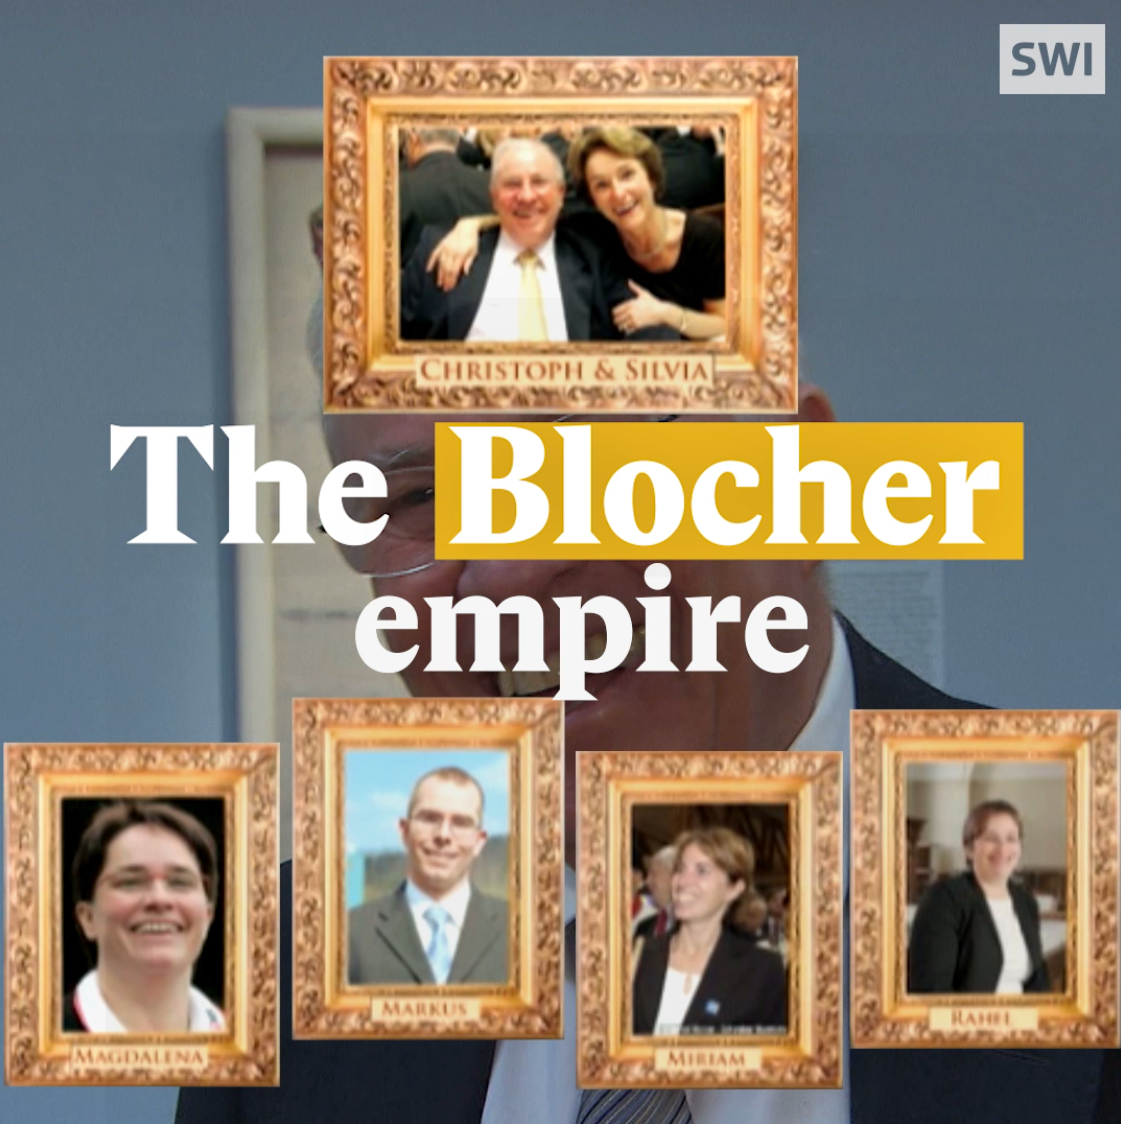 A cover image for a Nouvo video about one of the richest families in Switzerland: the Blocher.